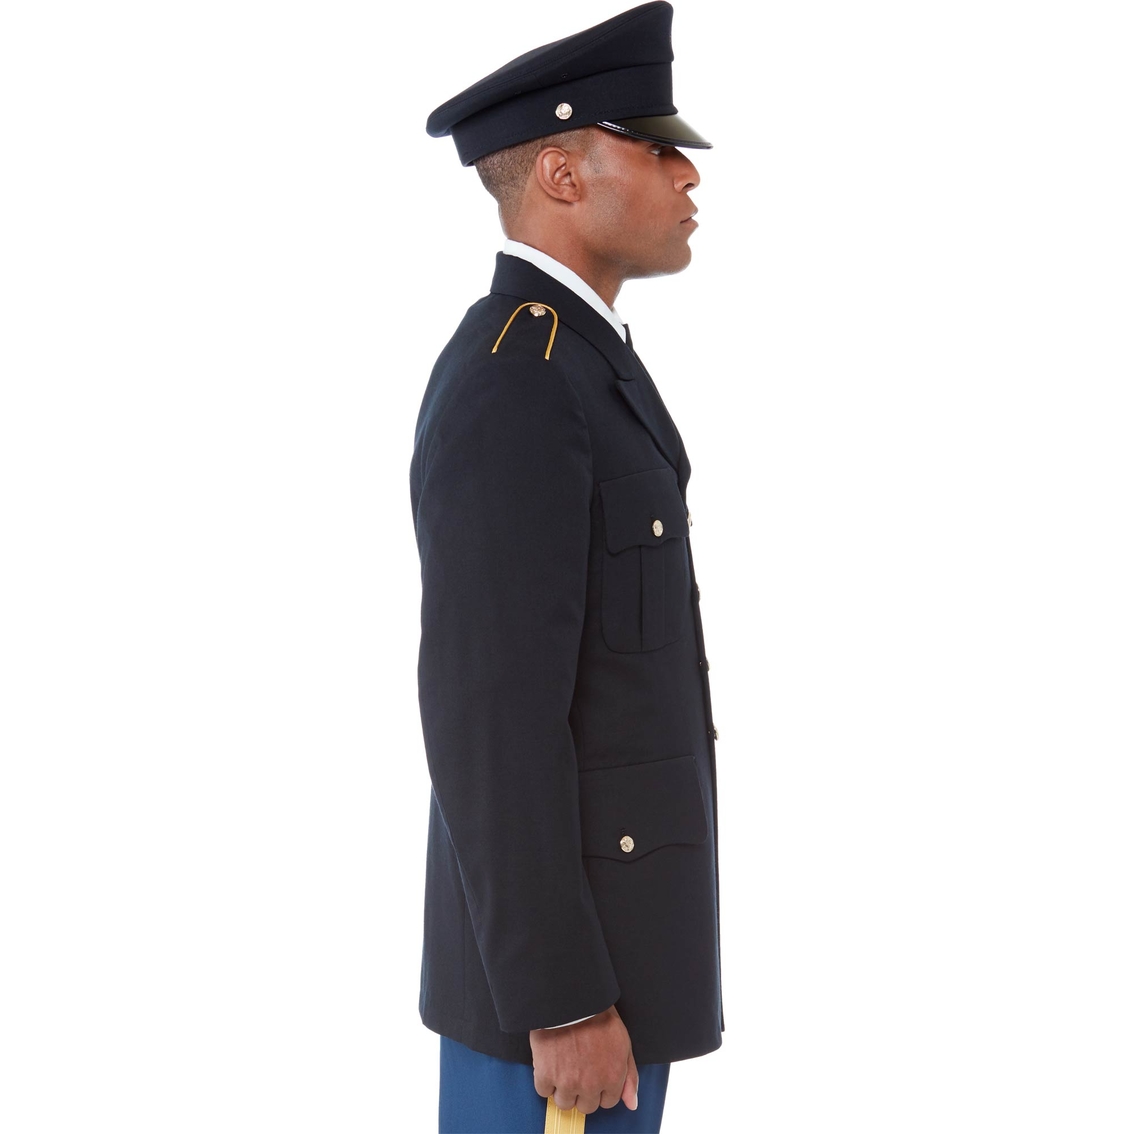 Army Enlisted Blue Dress Coat (ASU) - Image 3 of 4